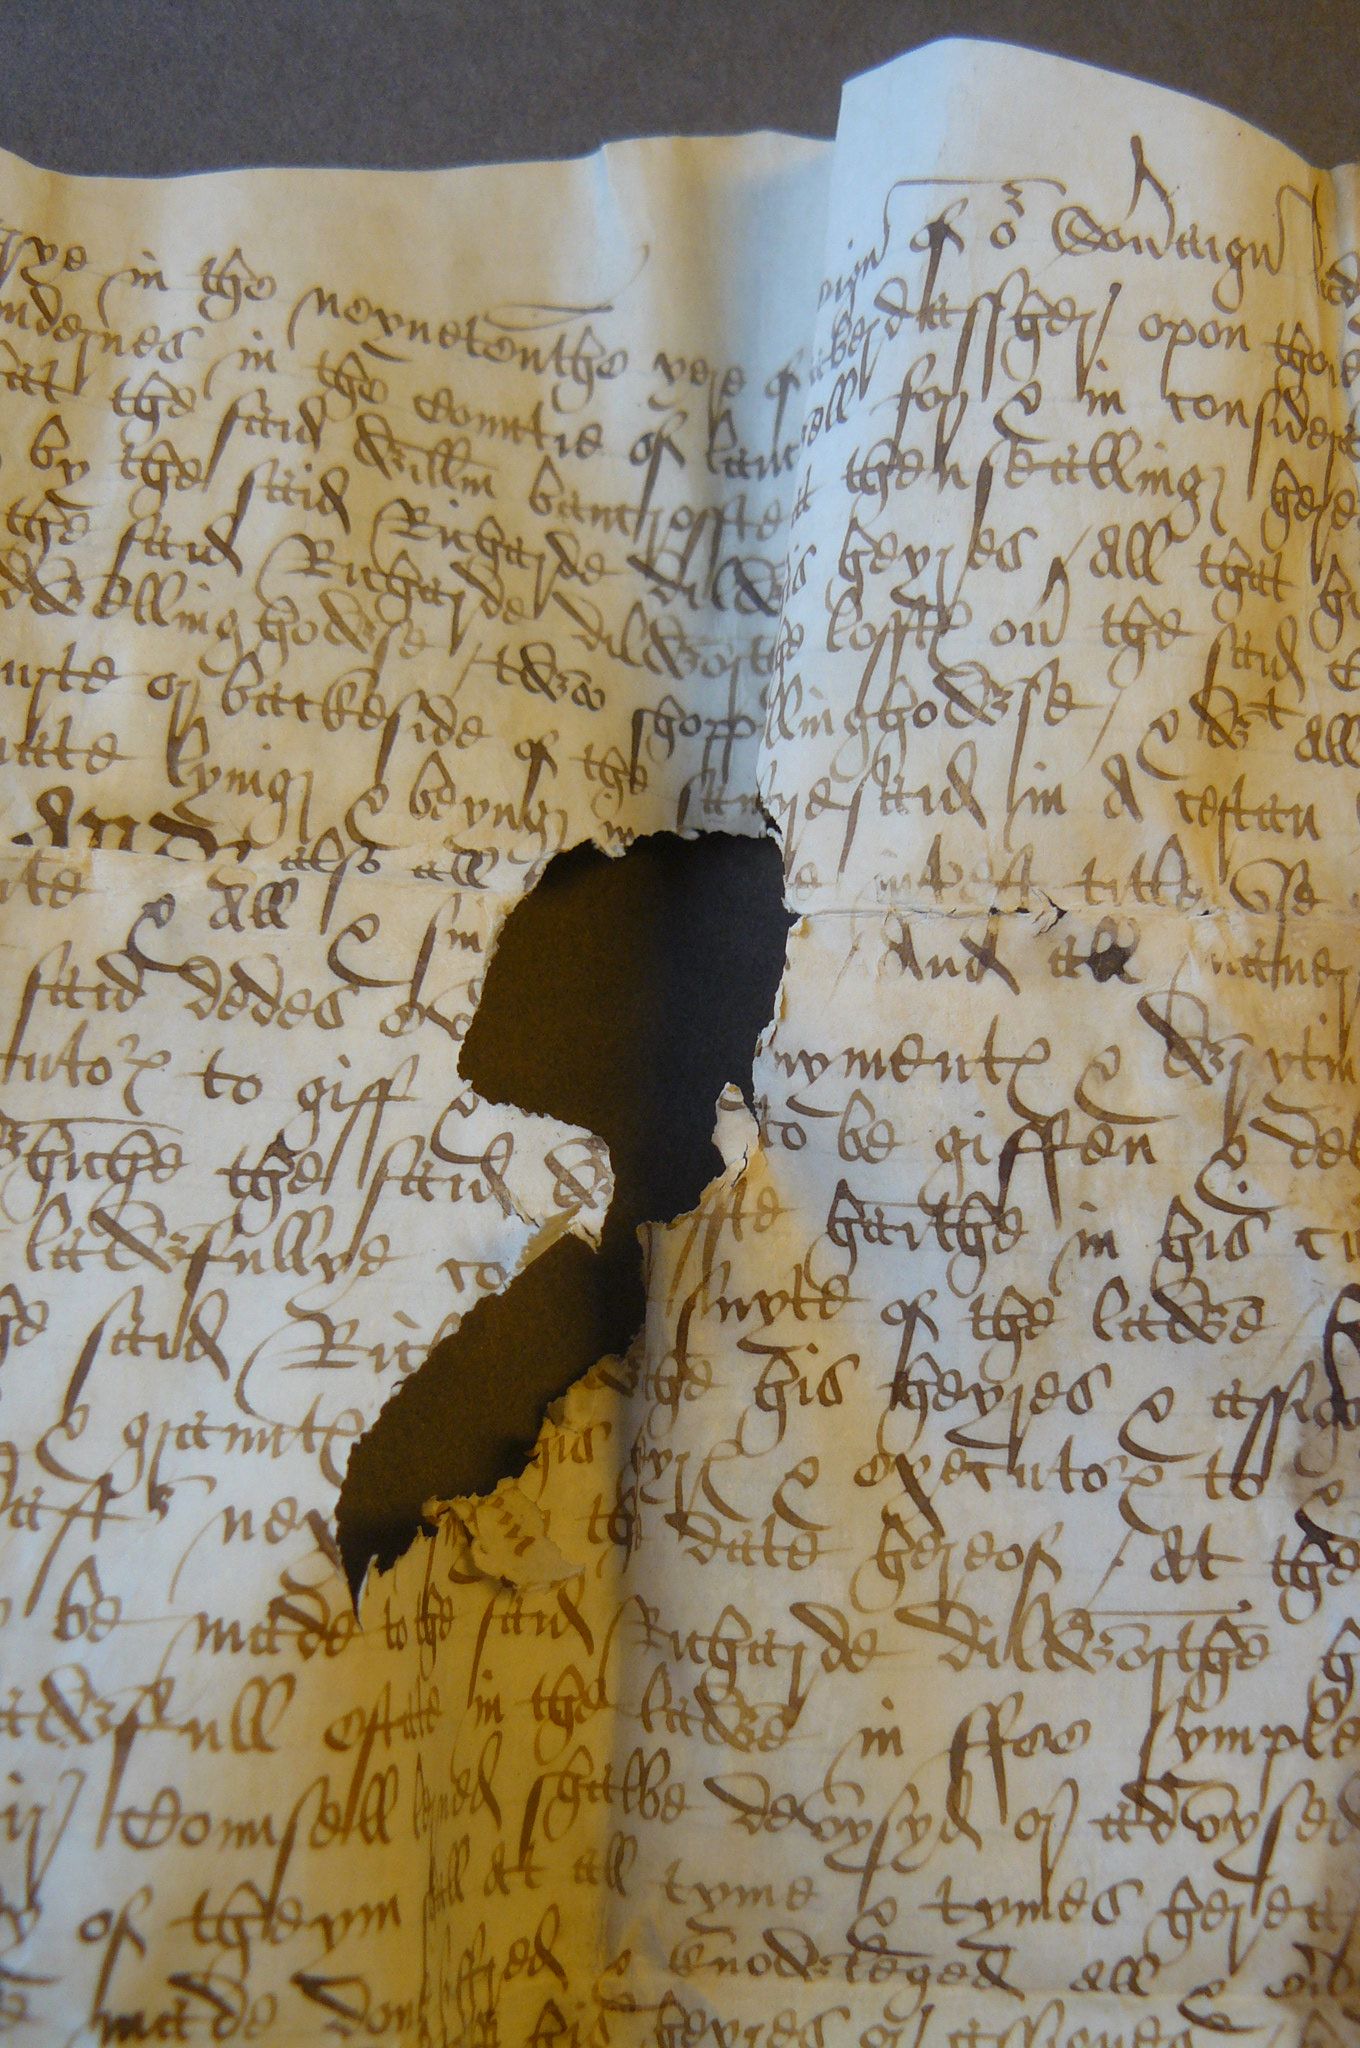 Image: Damaged parchment document from Yarburgh Muniments Lancashire Deeds YM. D. Lancs 13, 14th January 1576/7 (By permission of The Borthwick Institute for Archives)